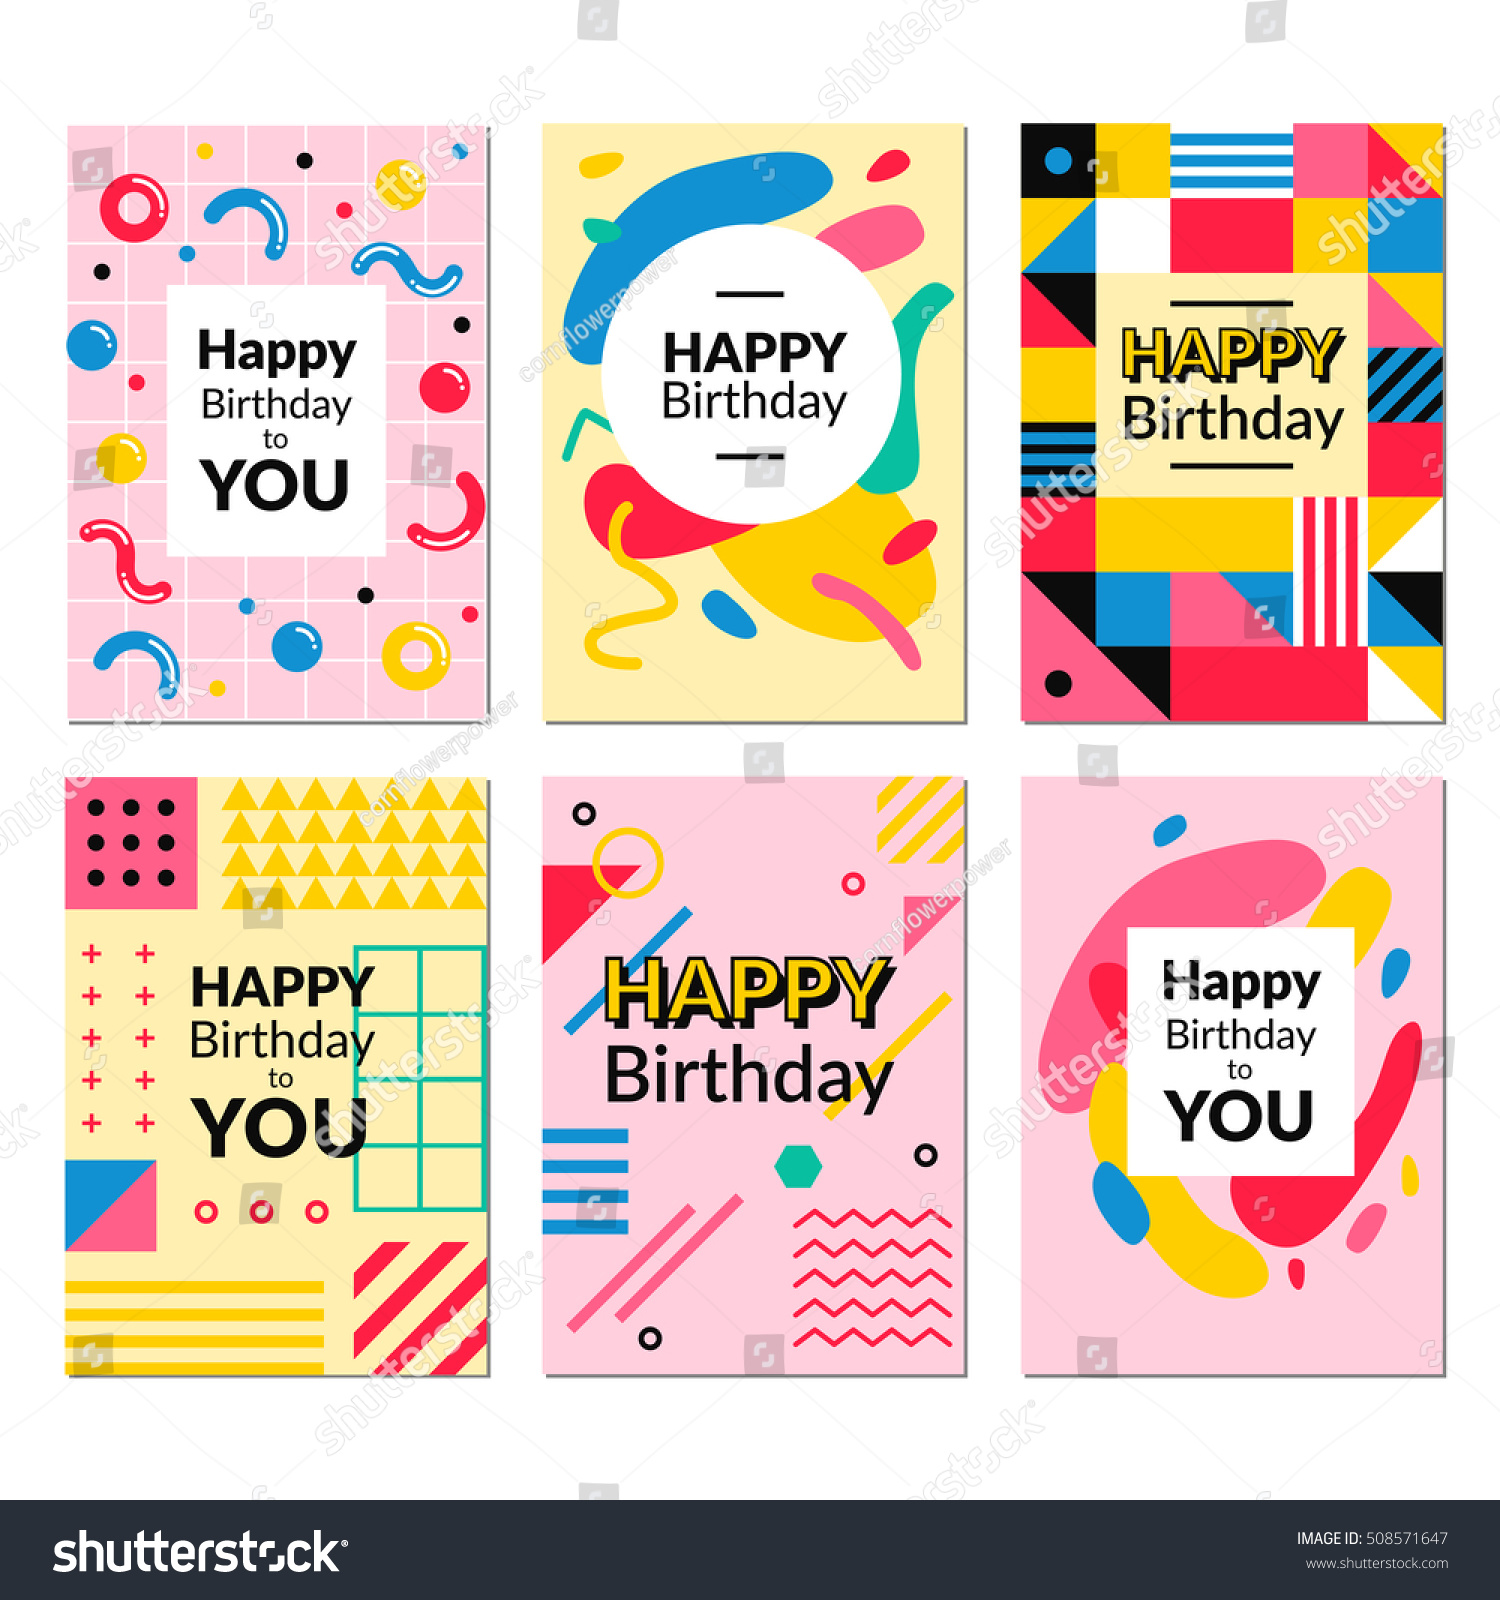 stock-vector-birthday-greeting-card-templates-vector-illustrations-for-website-banners-greeting-cards-508571647